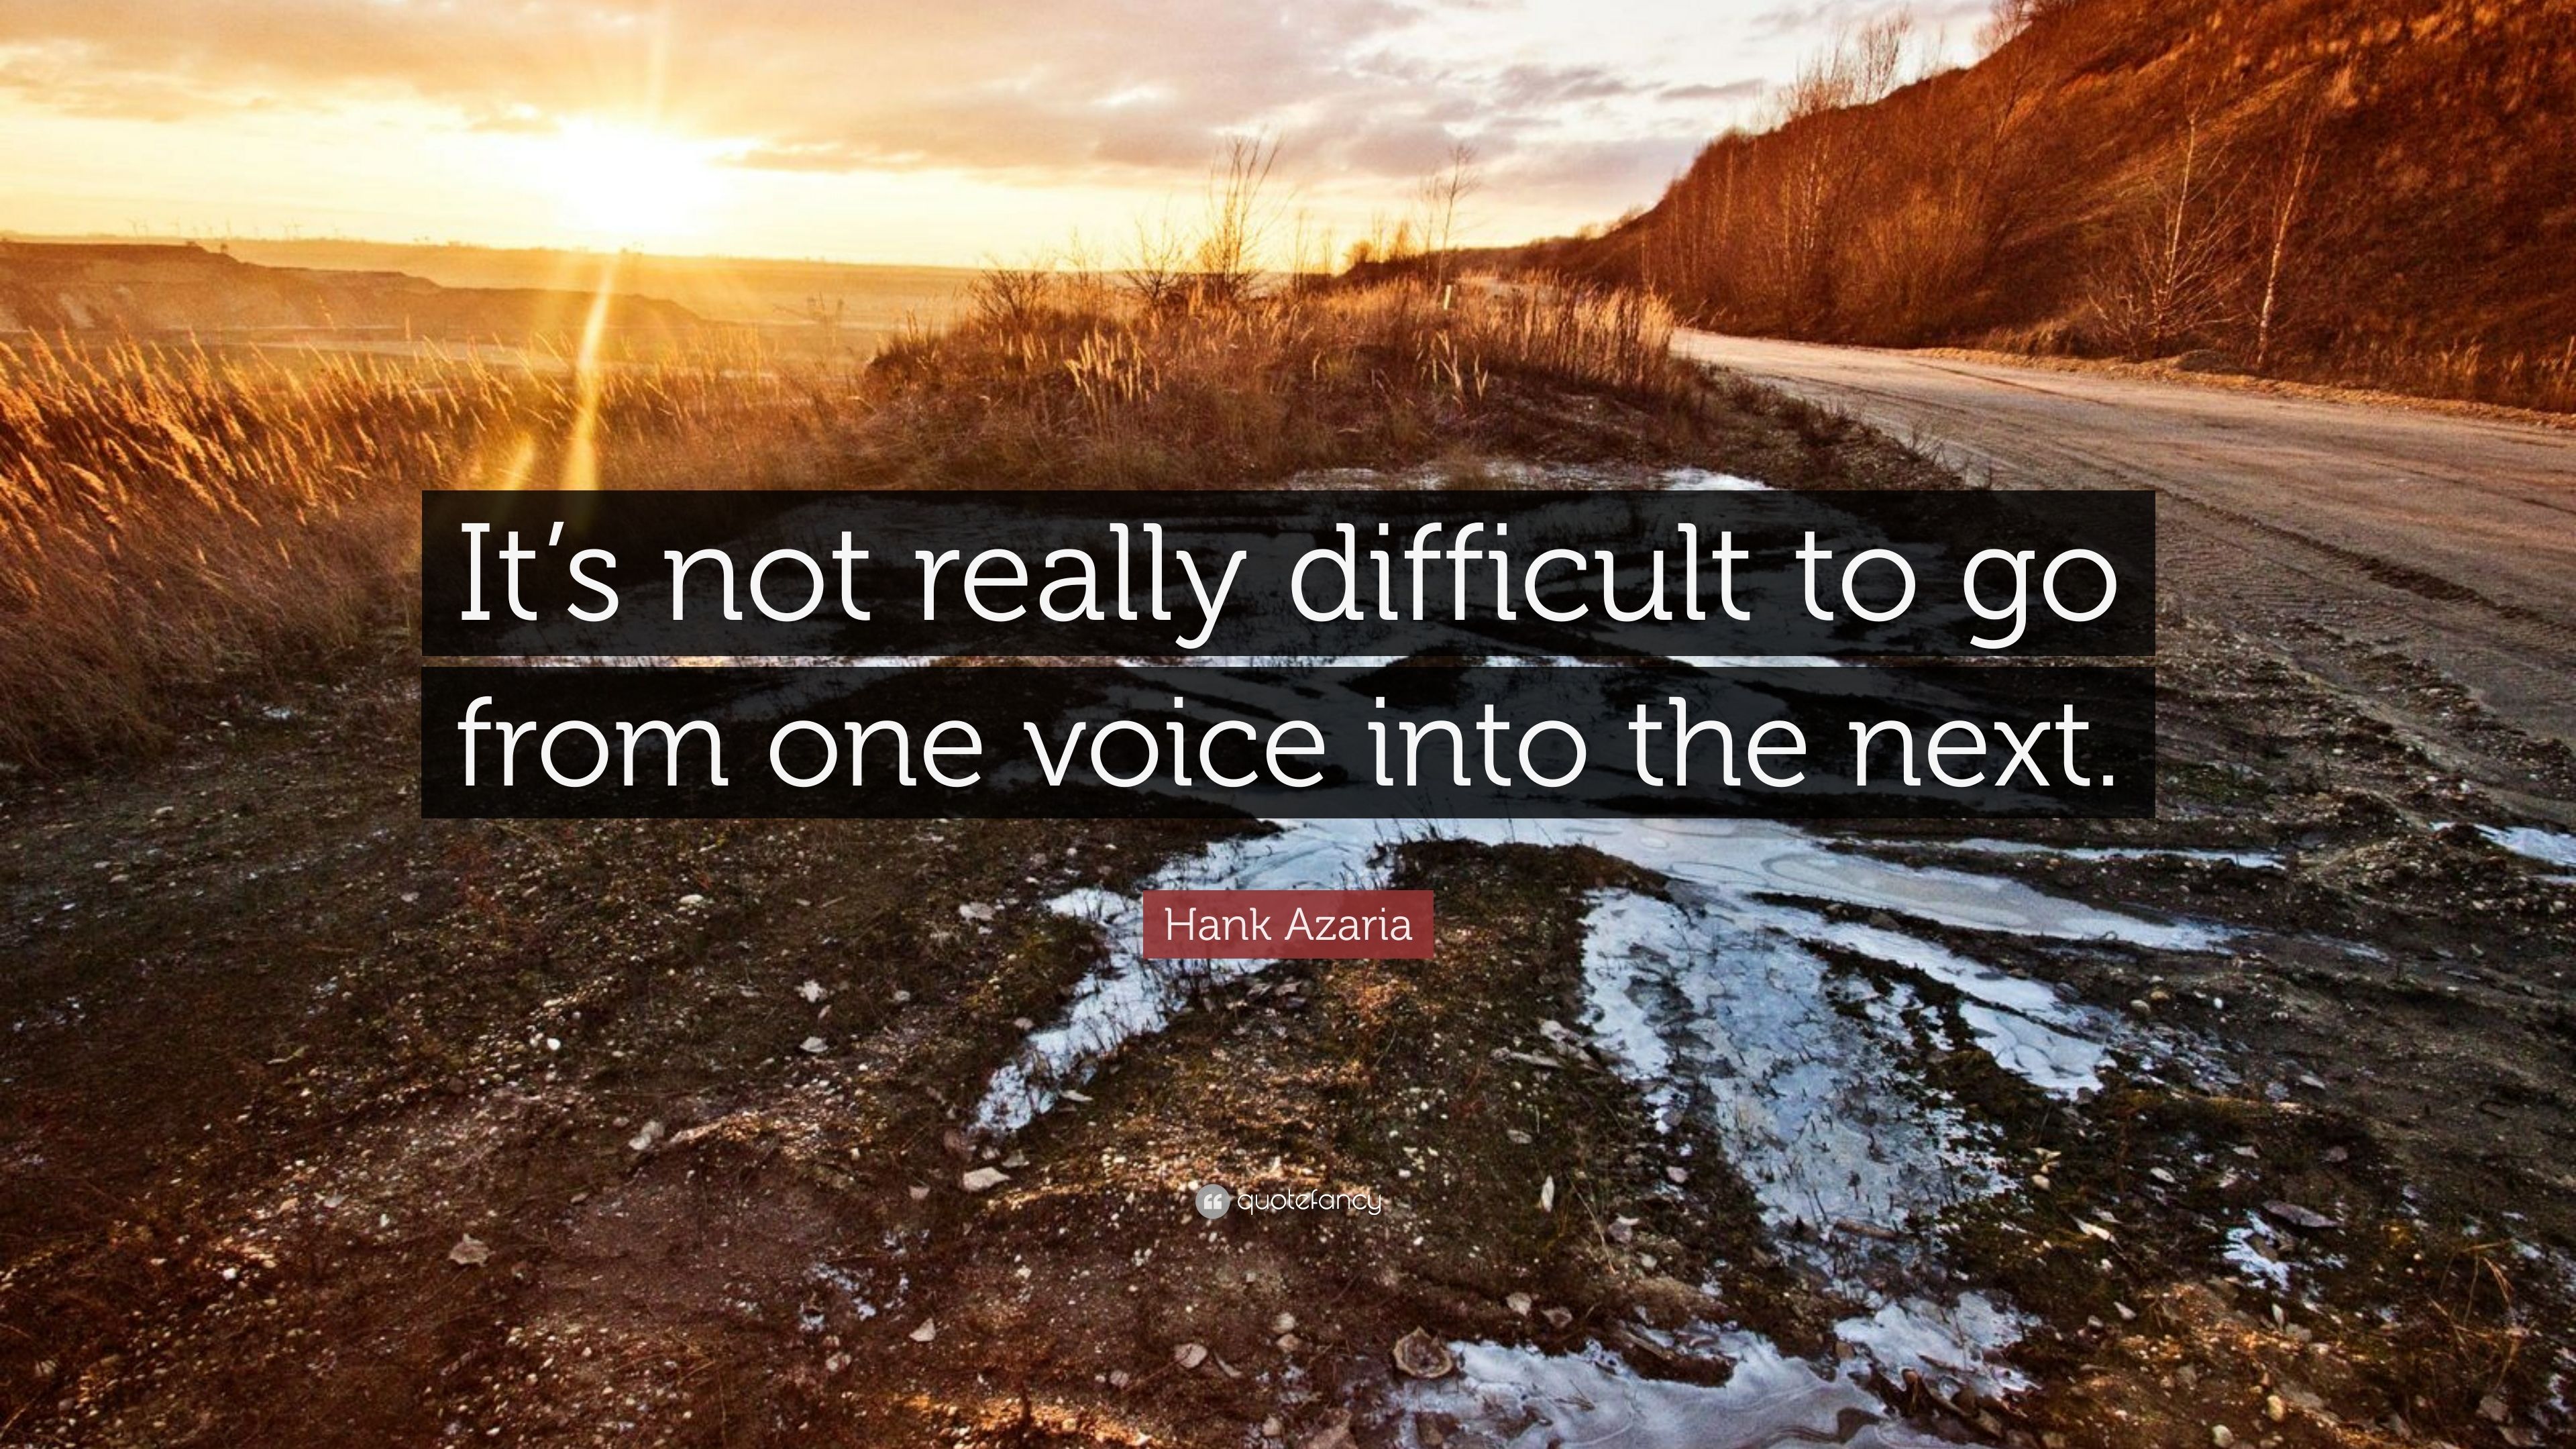 Hank Azaria Quote: “It's not really difficult to go from one voice